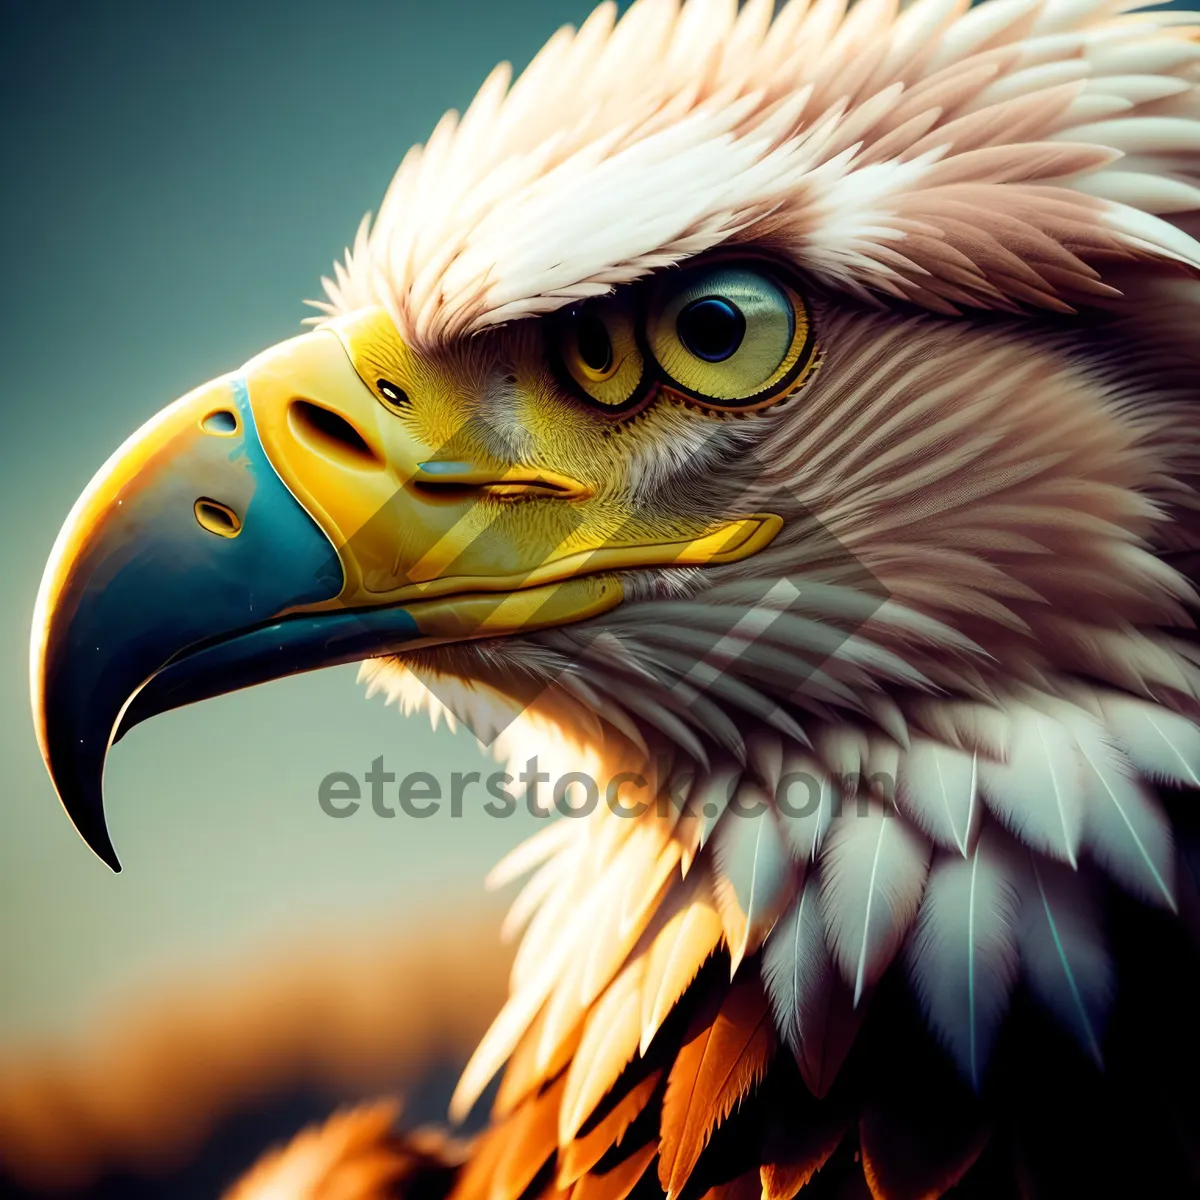 Picture of Bald Eagle Close-Up: Majestic Predator with Piercing Yellow Eyes